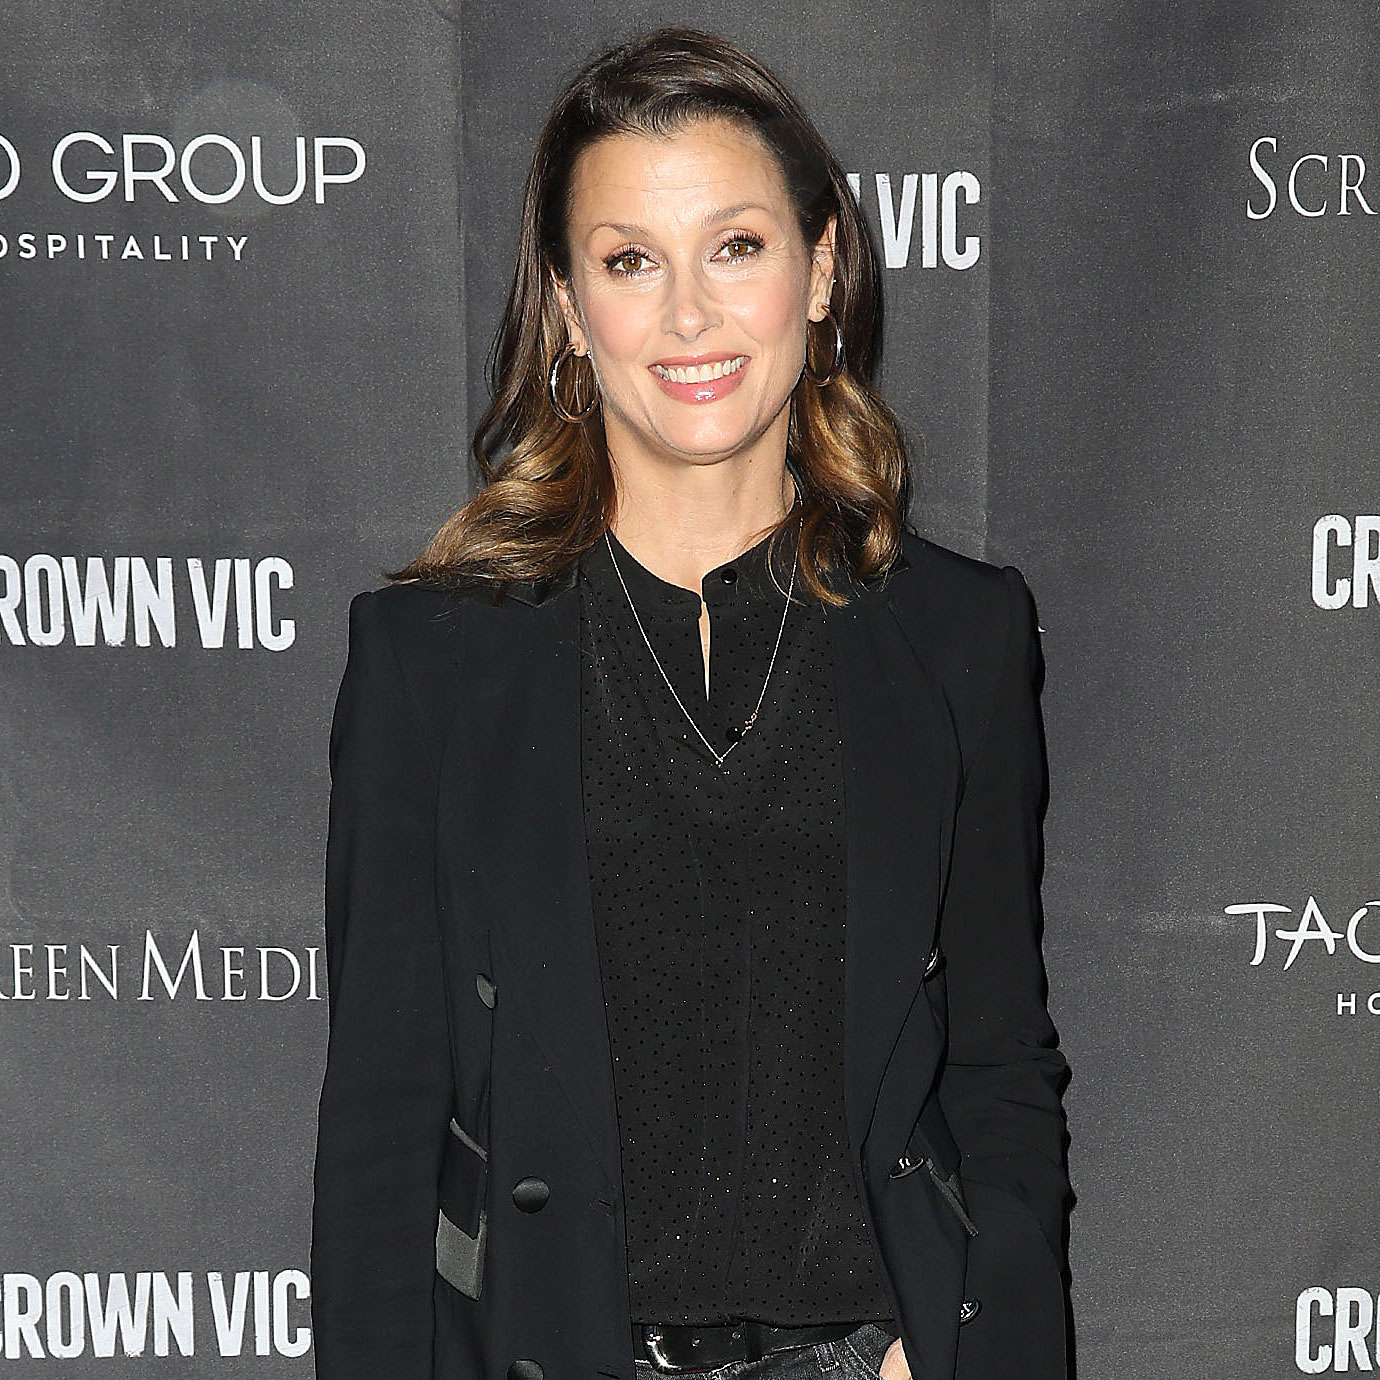 Bridget Moynahan on Returning to the 'Sex and the City' Universe